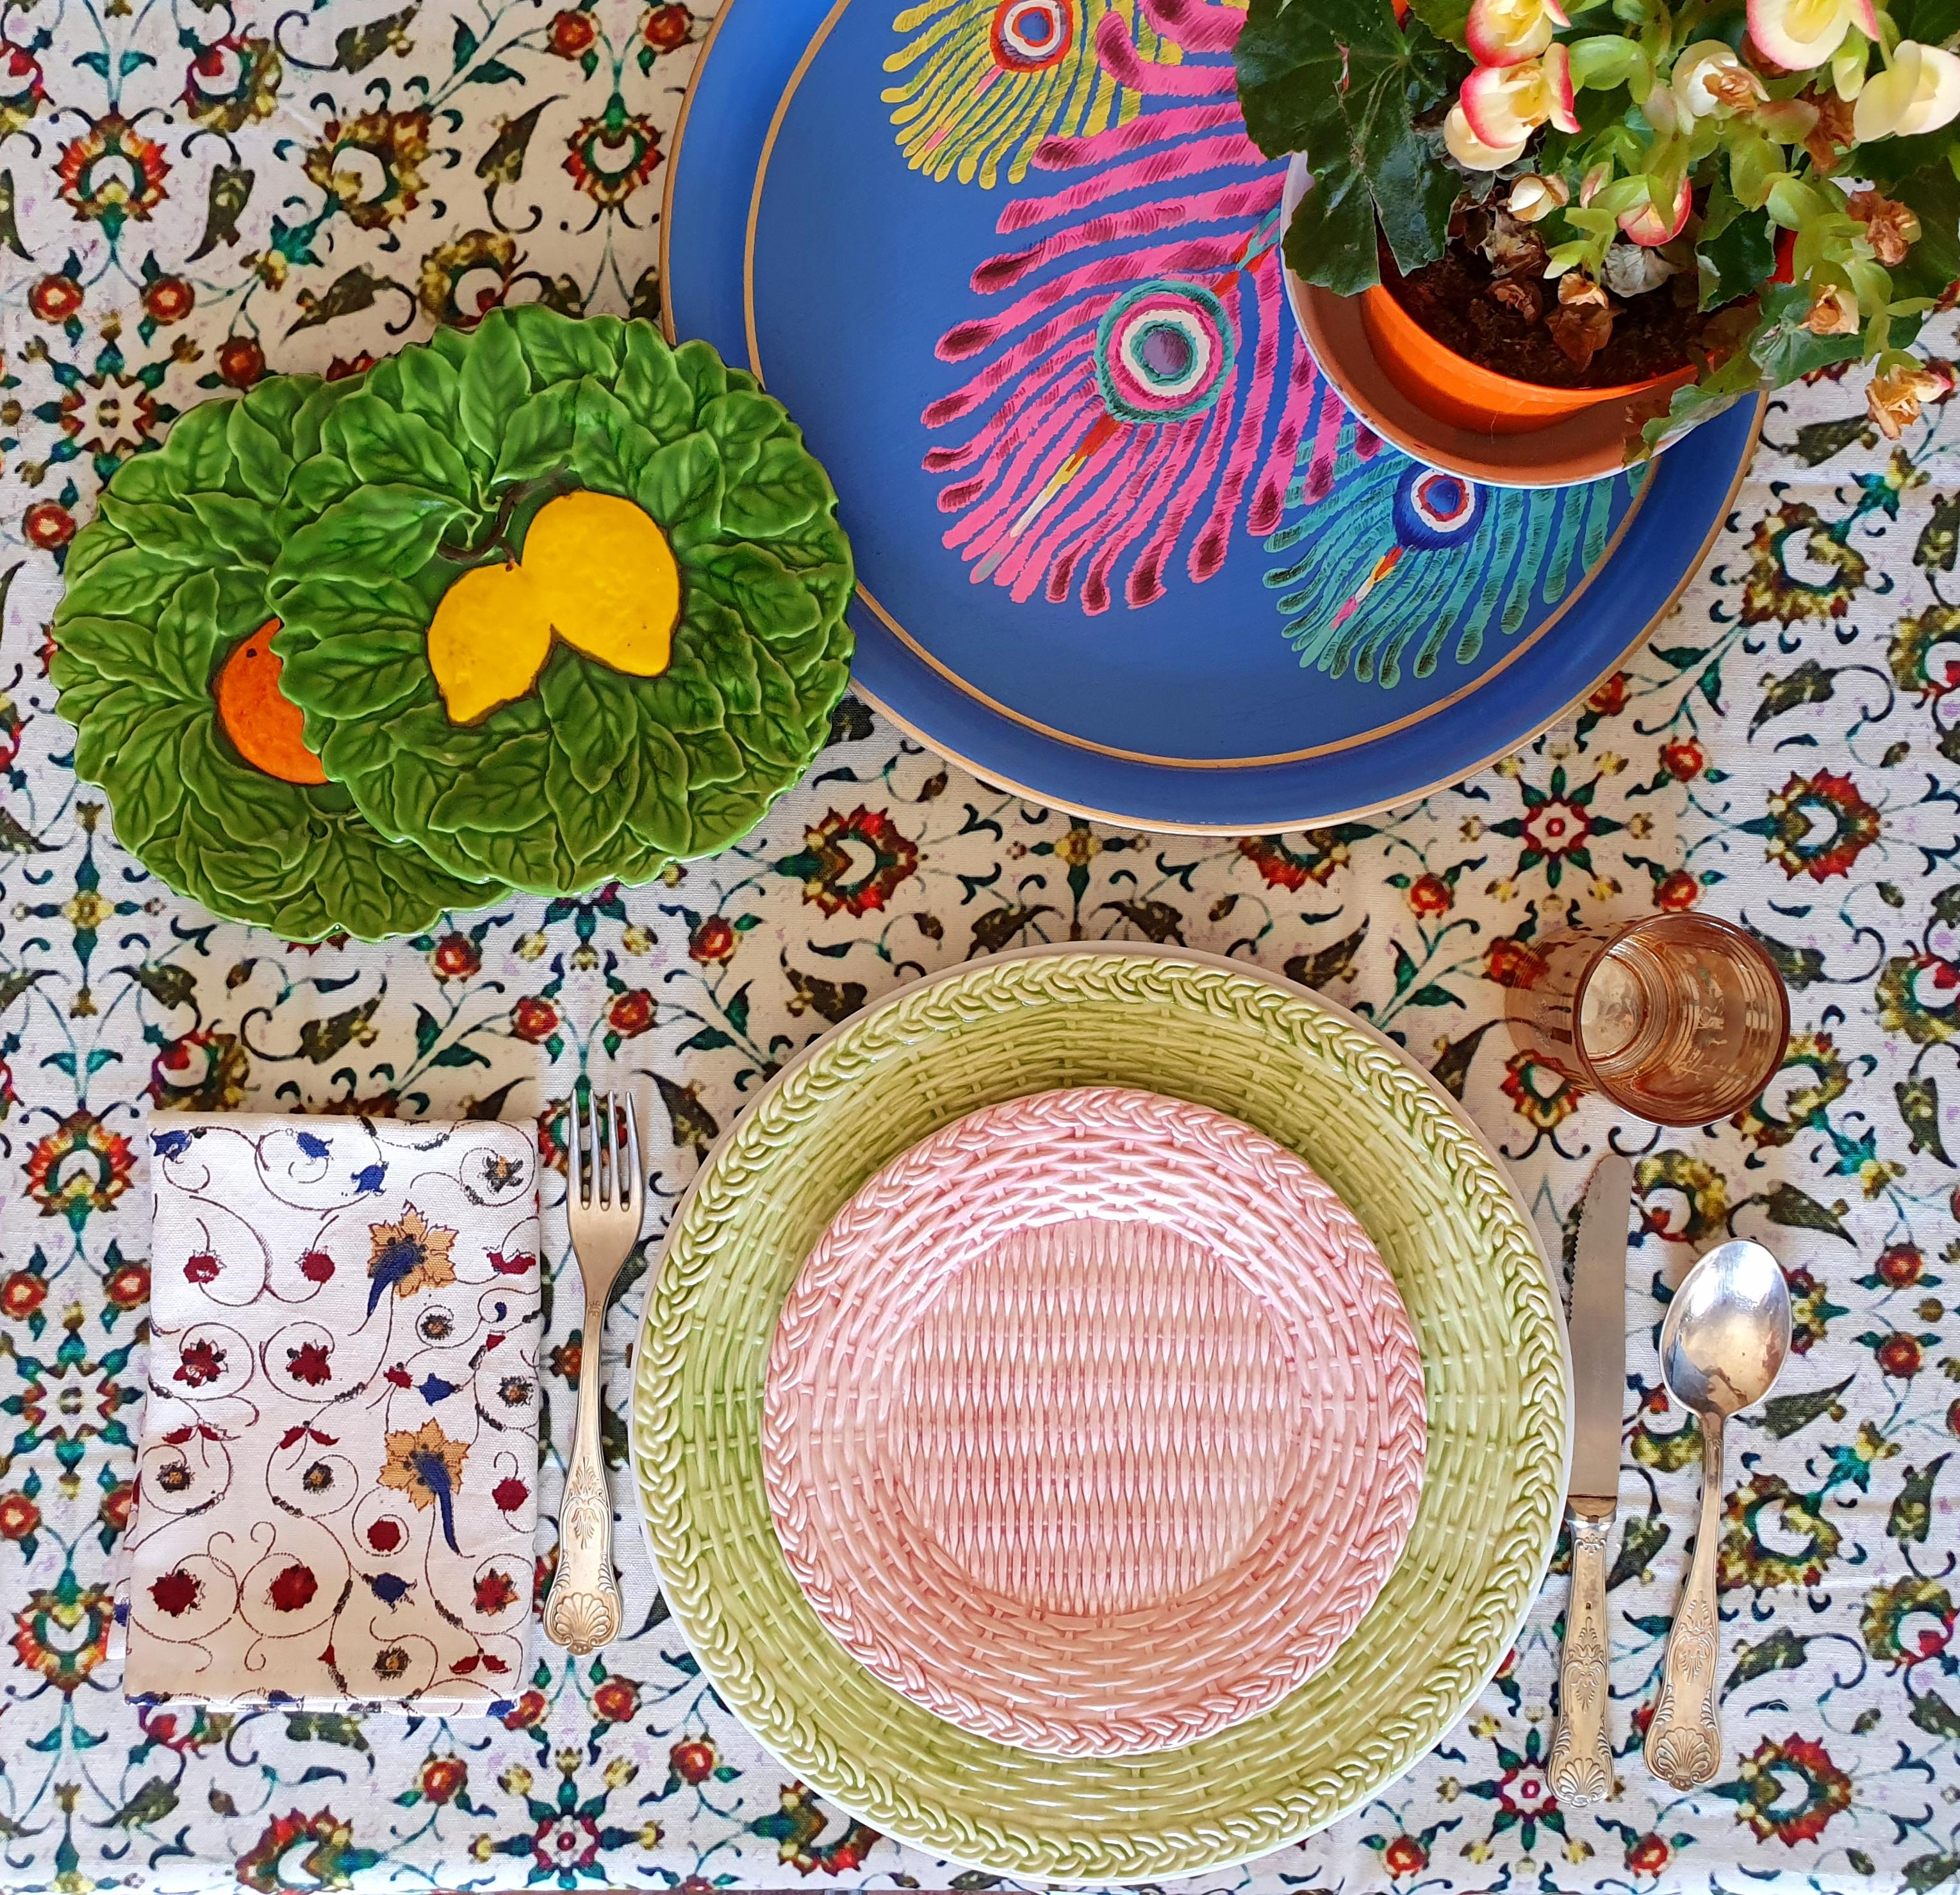 Hand painted ceramic wicker plates
Pink color
Made in Italy
Measures: 21cm diameter.